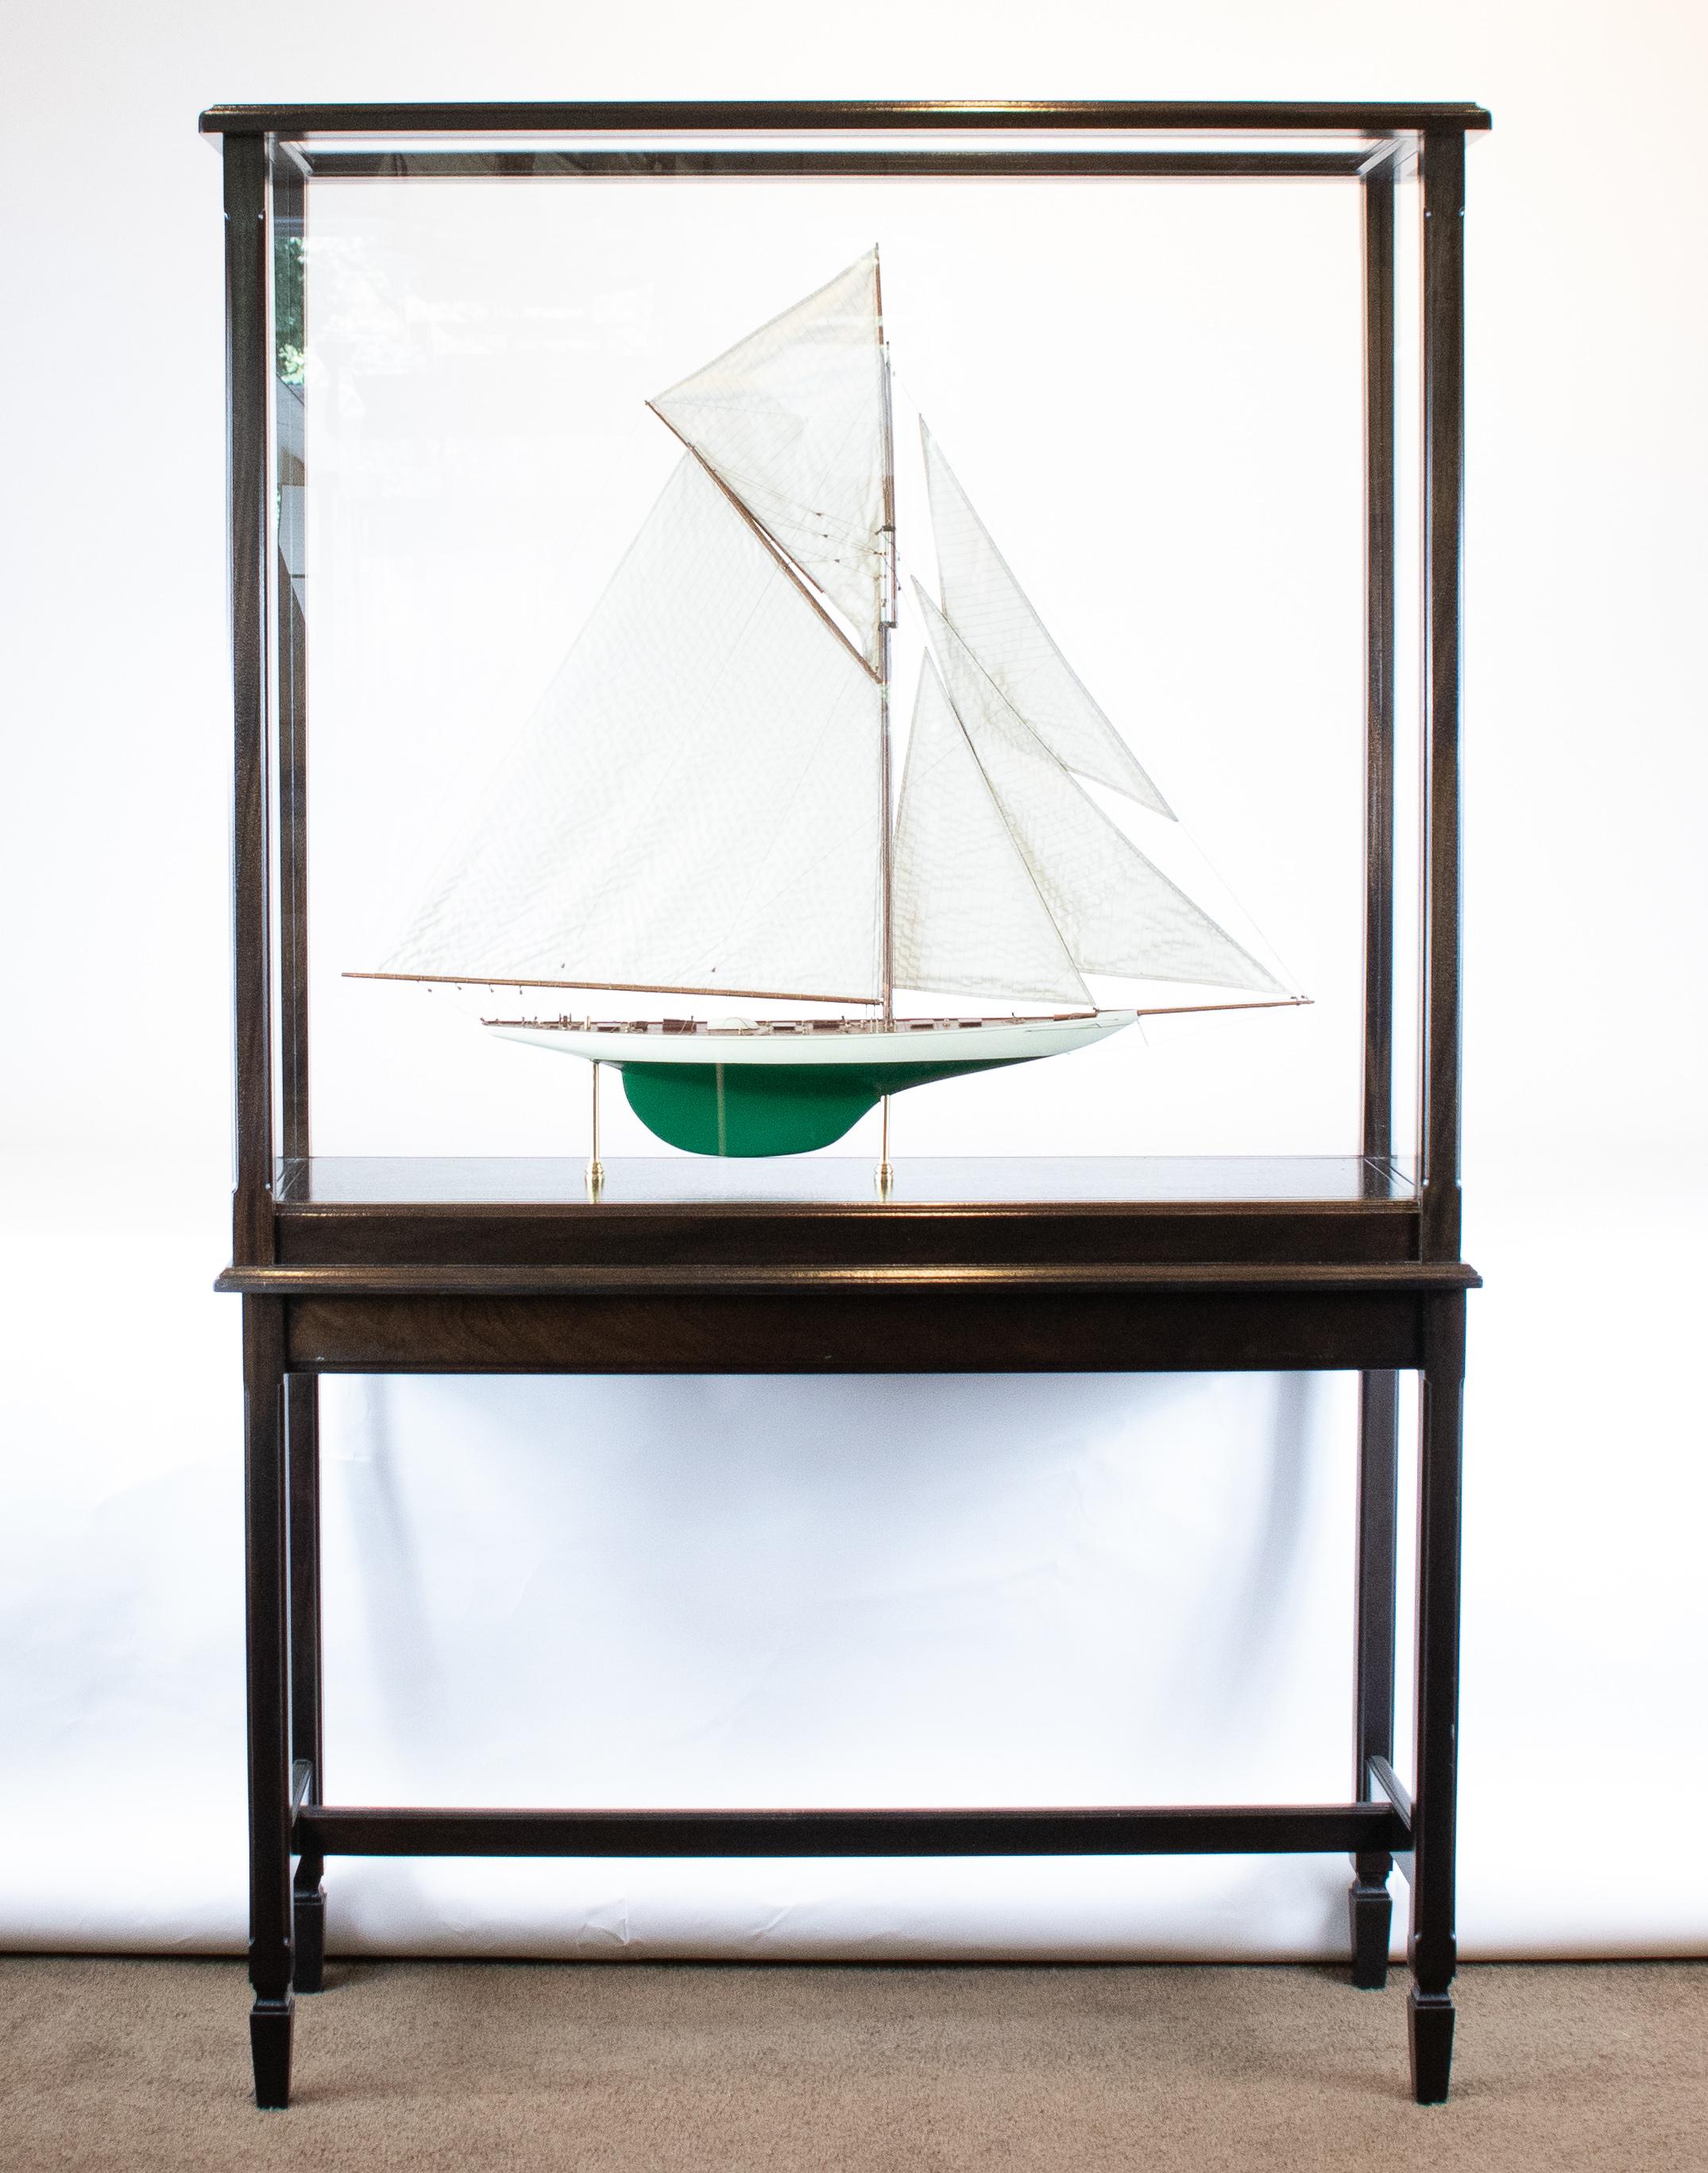 Model of the America's Cup yacht 